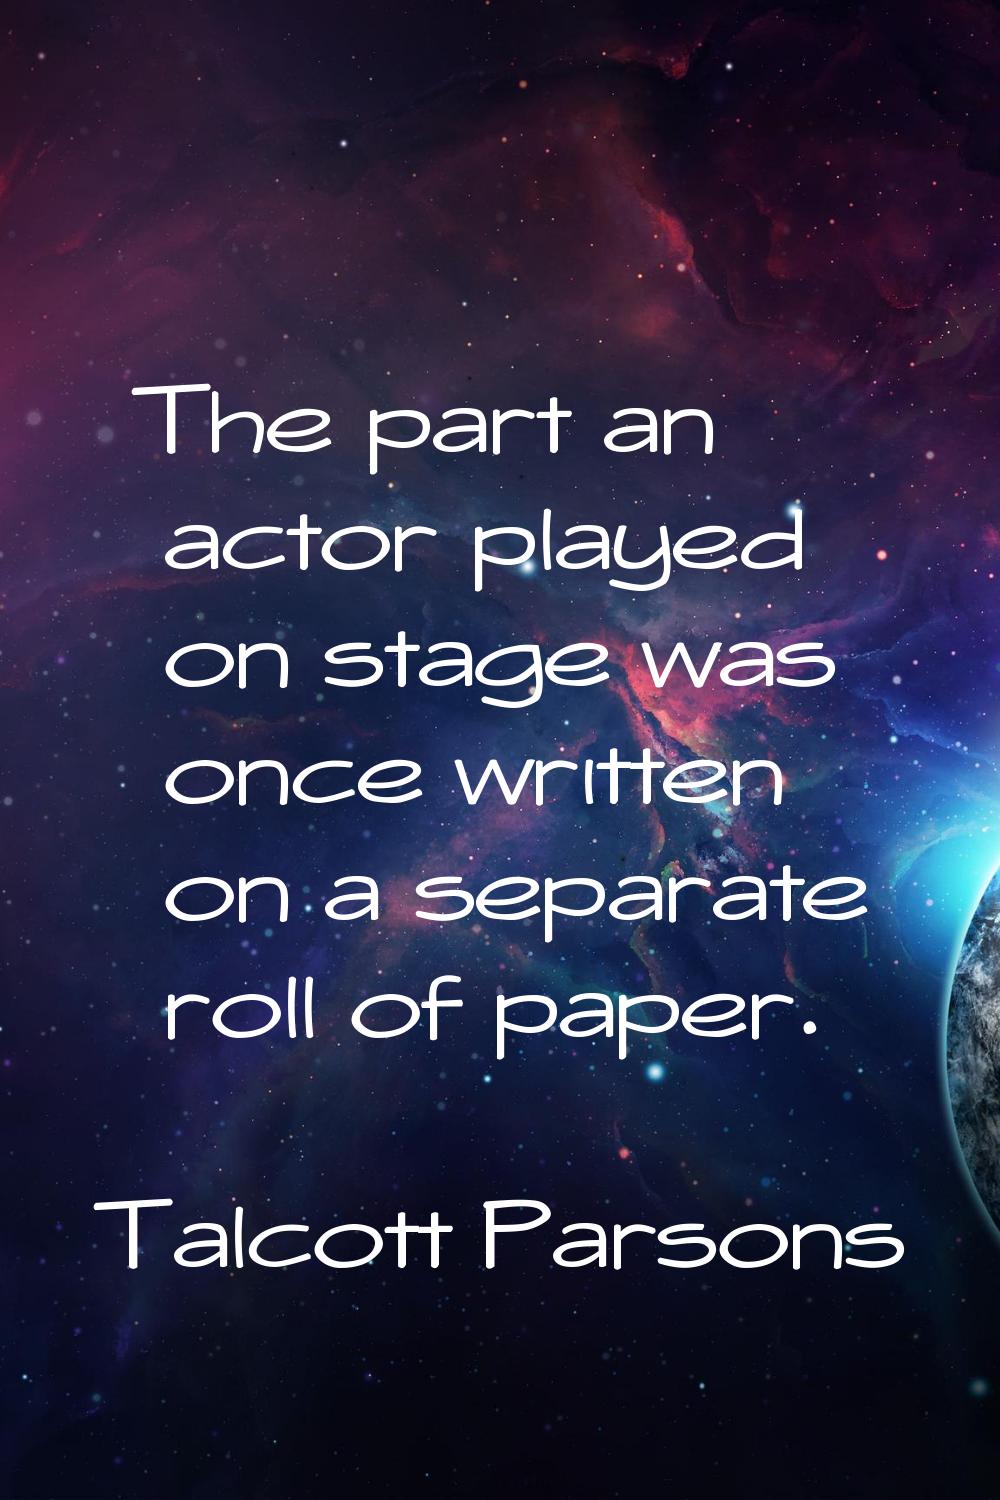 The part an actor played on stage was once written on a separate roll of paper.